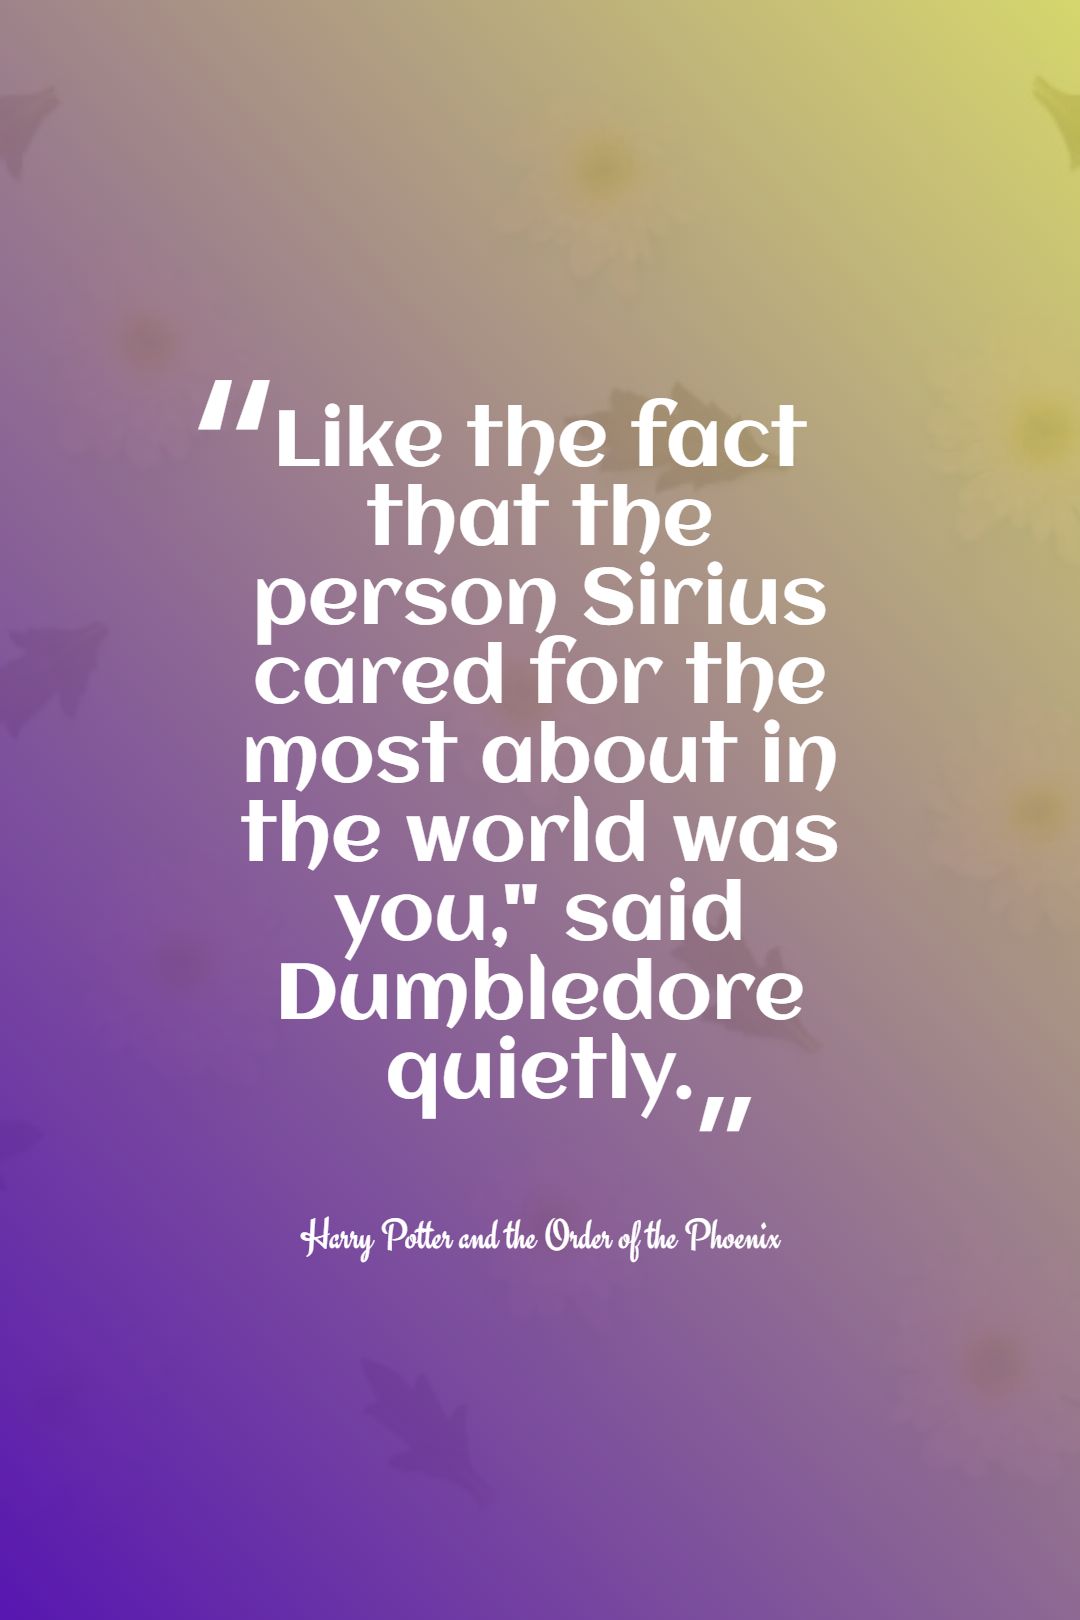 Like the fact that the person Sirius cared for the most about in the world was you said Dumbledore quietly.